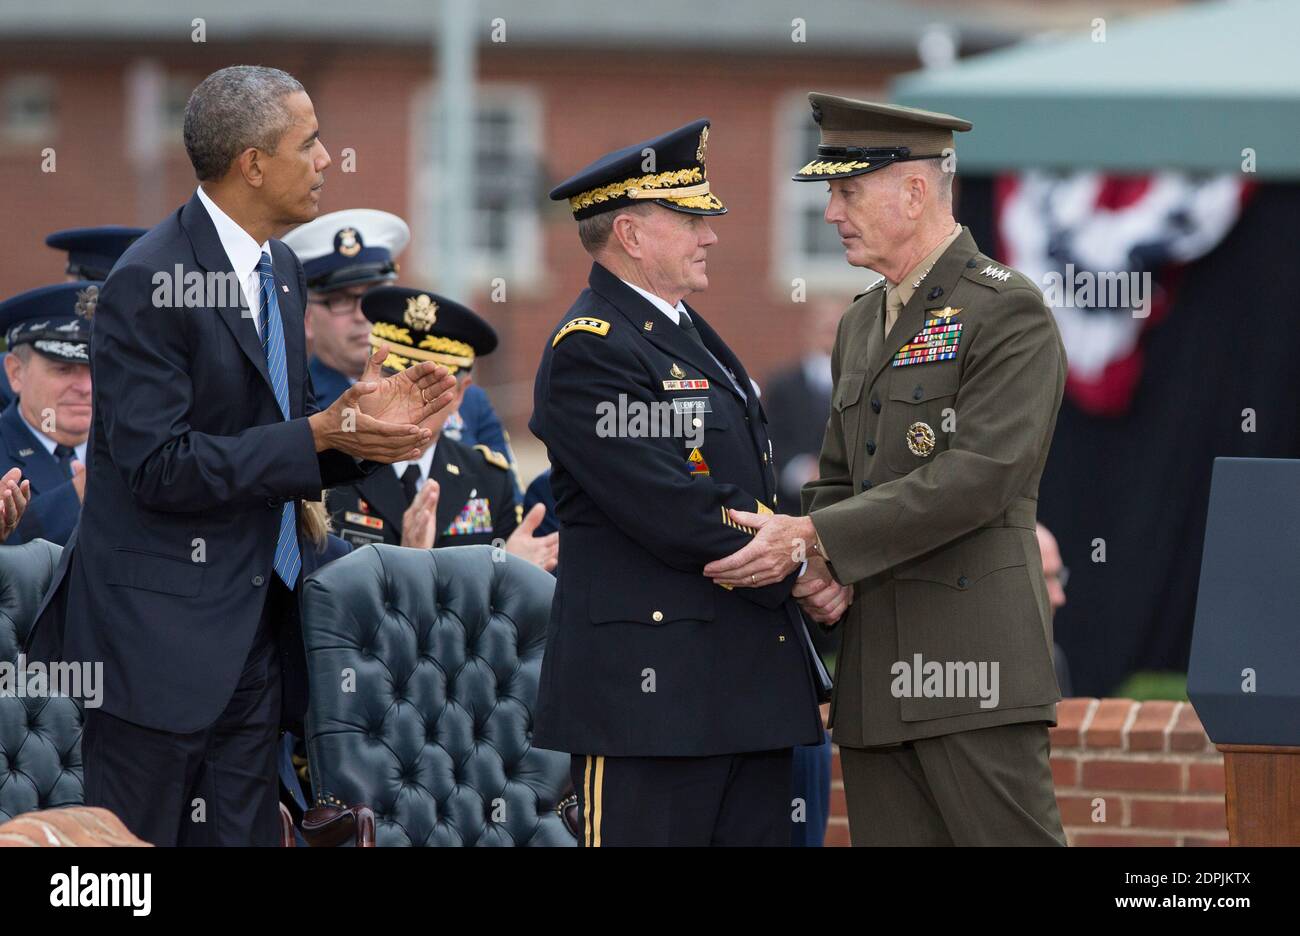 General Martin Dempsey(center) receives congratulations from General Joseph Dunford(right) during Dempsey's retirement ceremony at Fort Myer, Virginia, September 25, 2015. Photo by Chris Kleponis /Pool/ABACAPRESS.COM Stock Photo